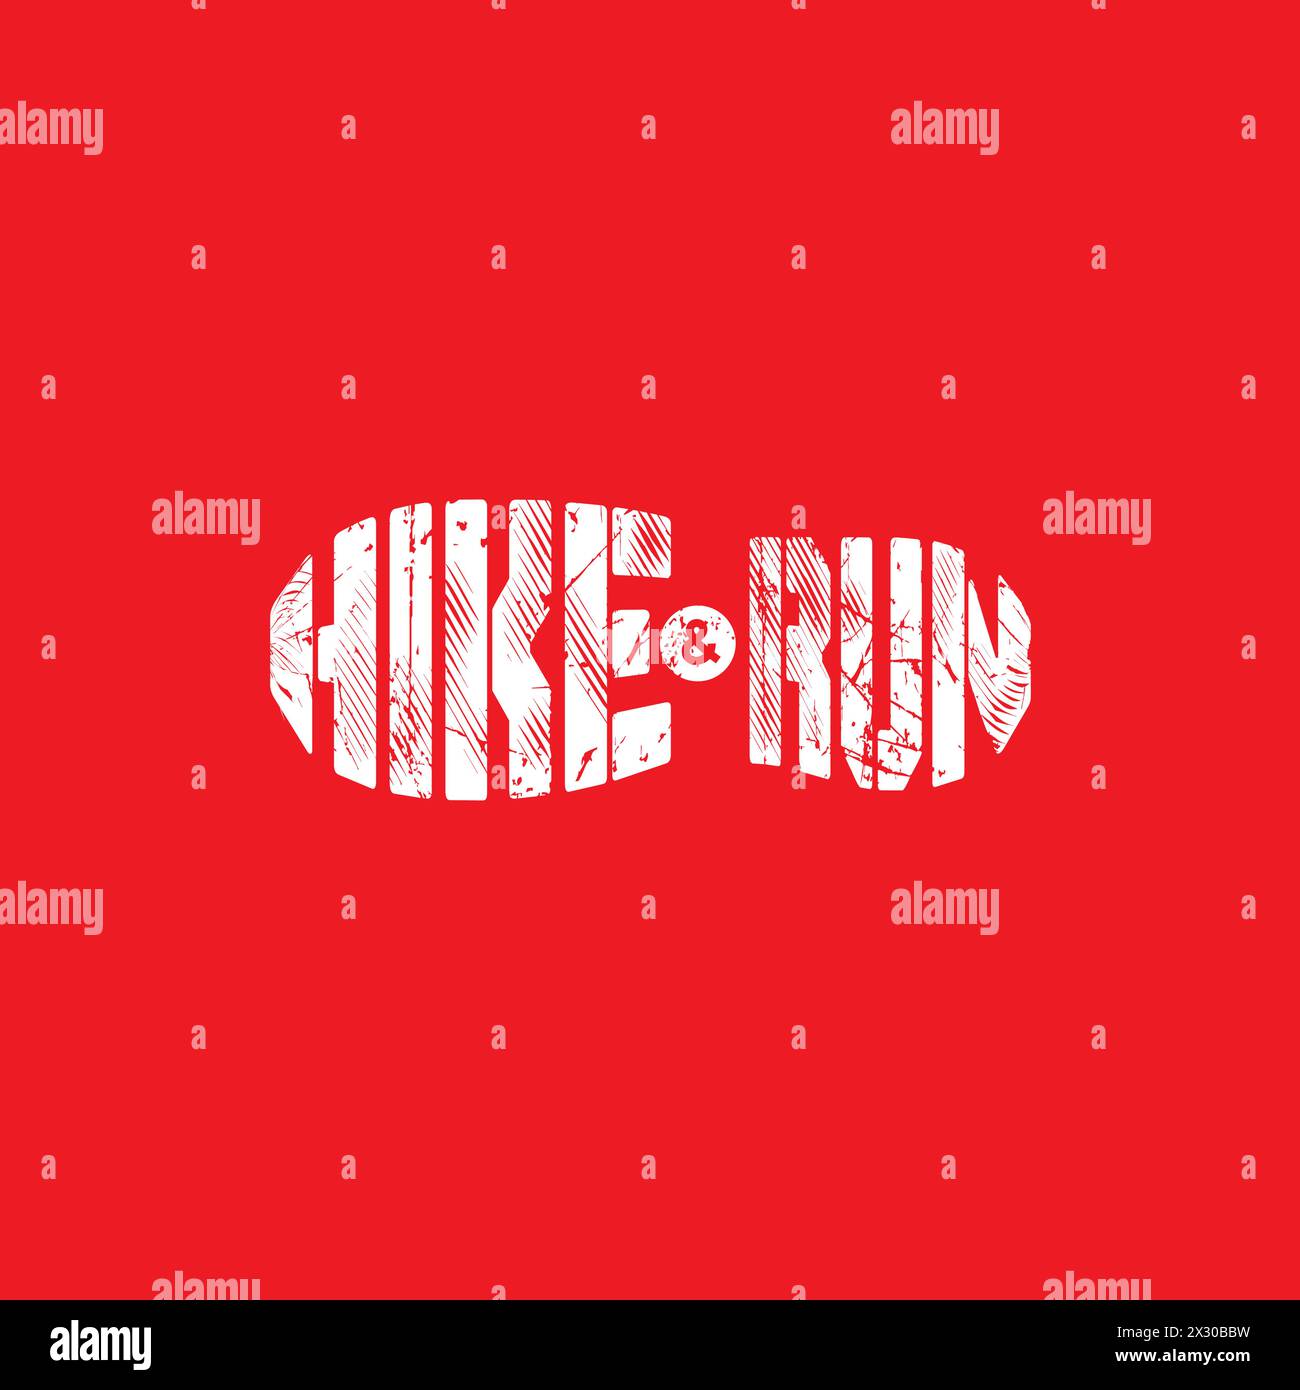 Hike and Run logo forming shoes. running logo Stock Vector